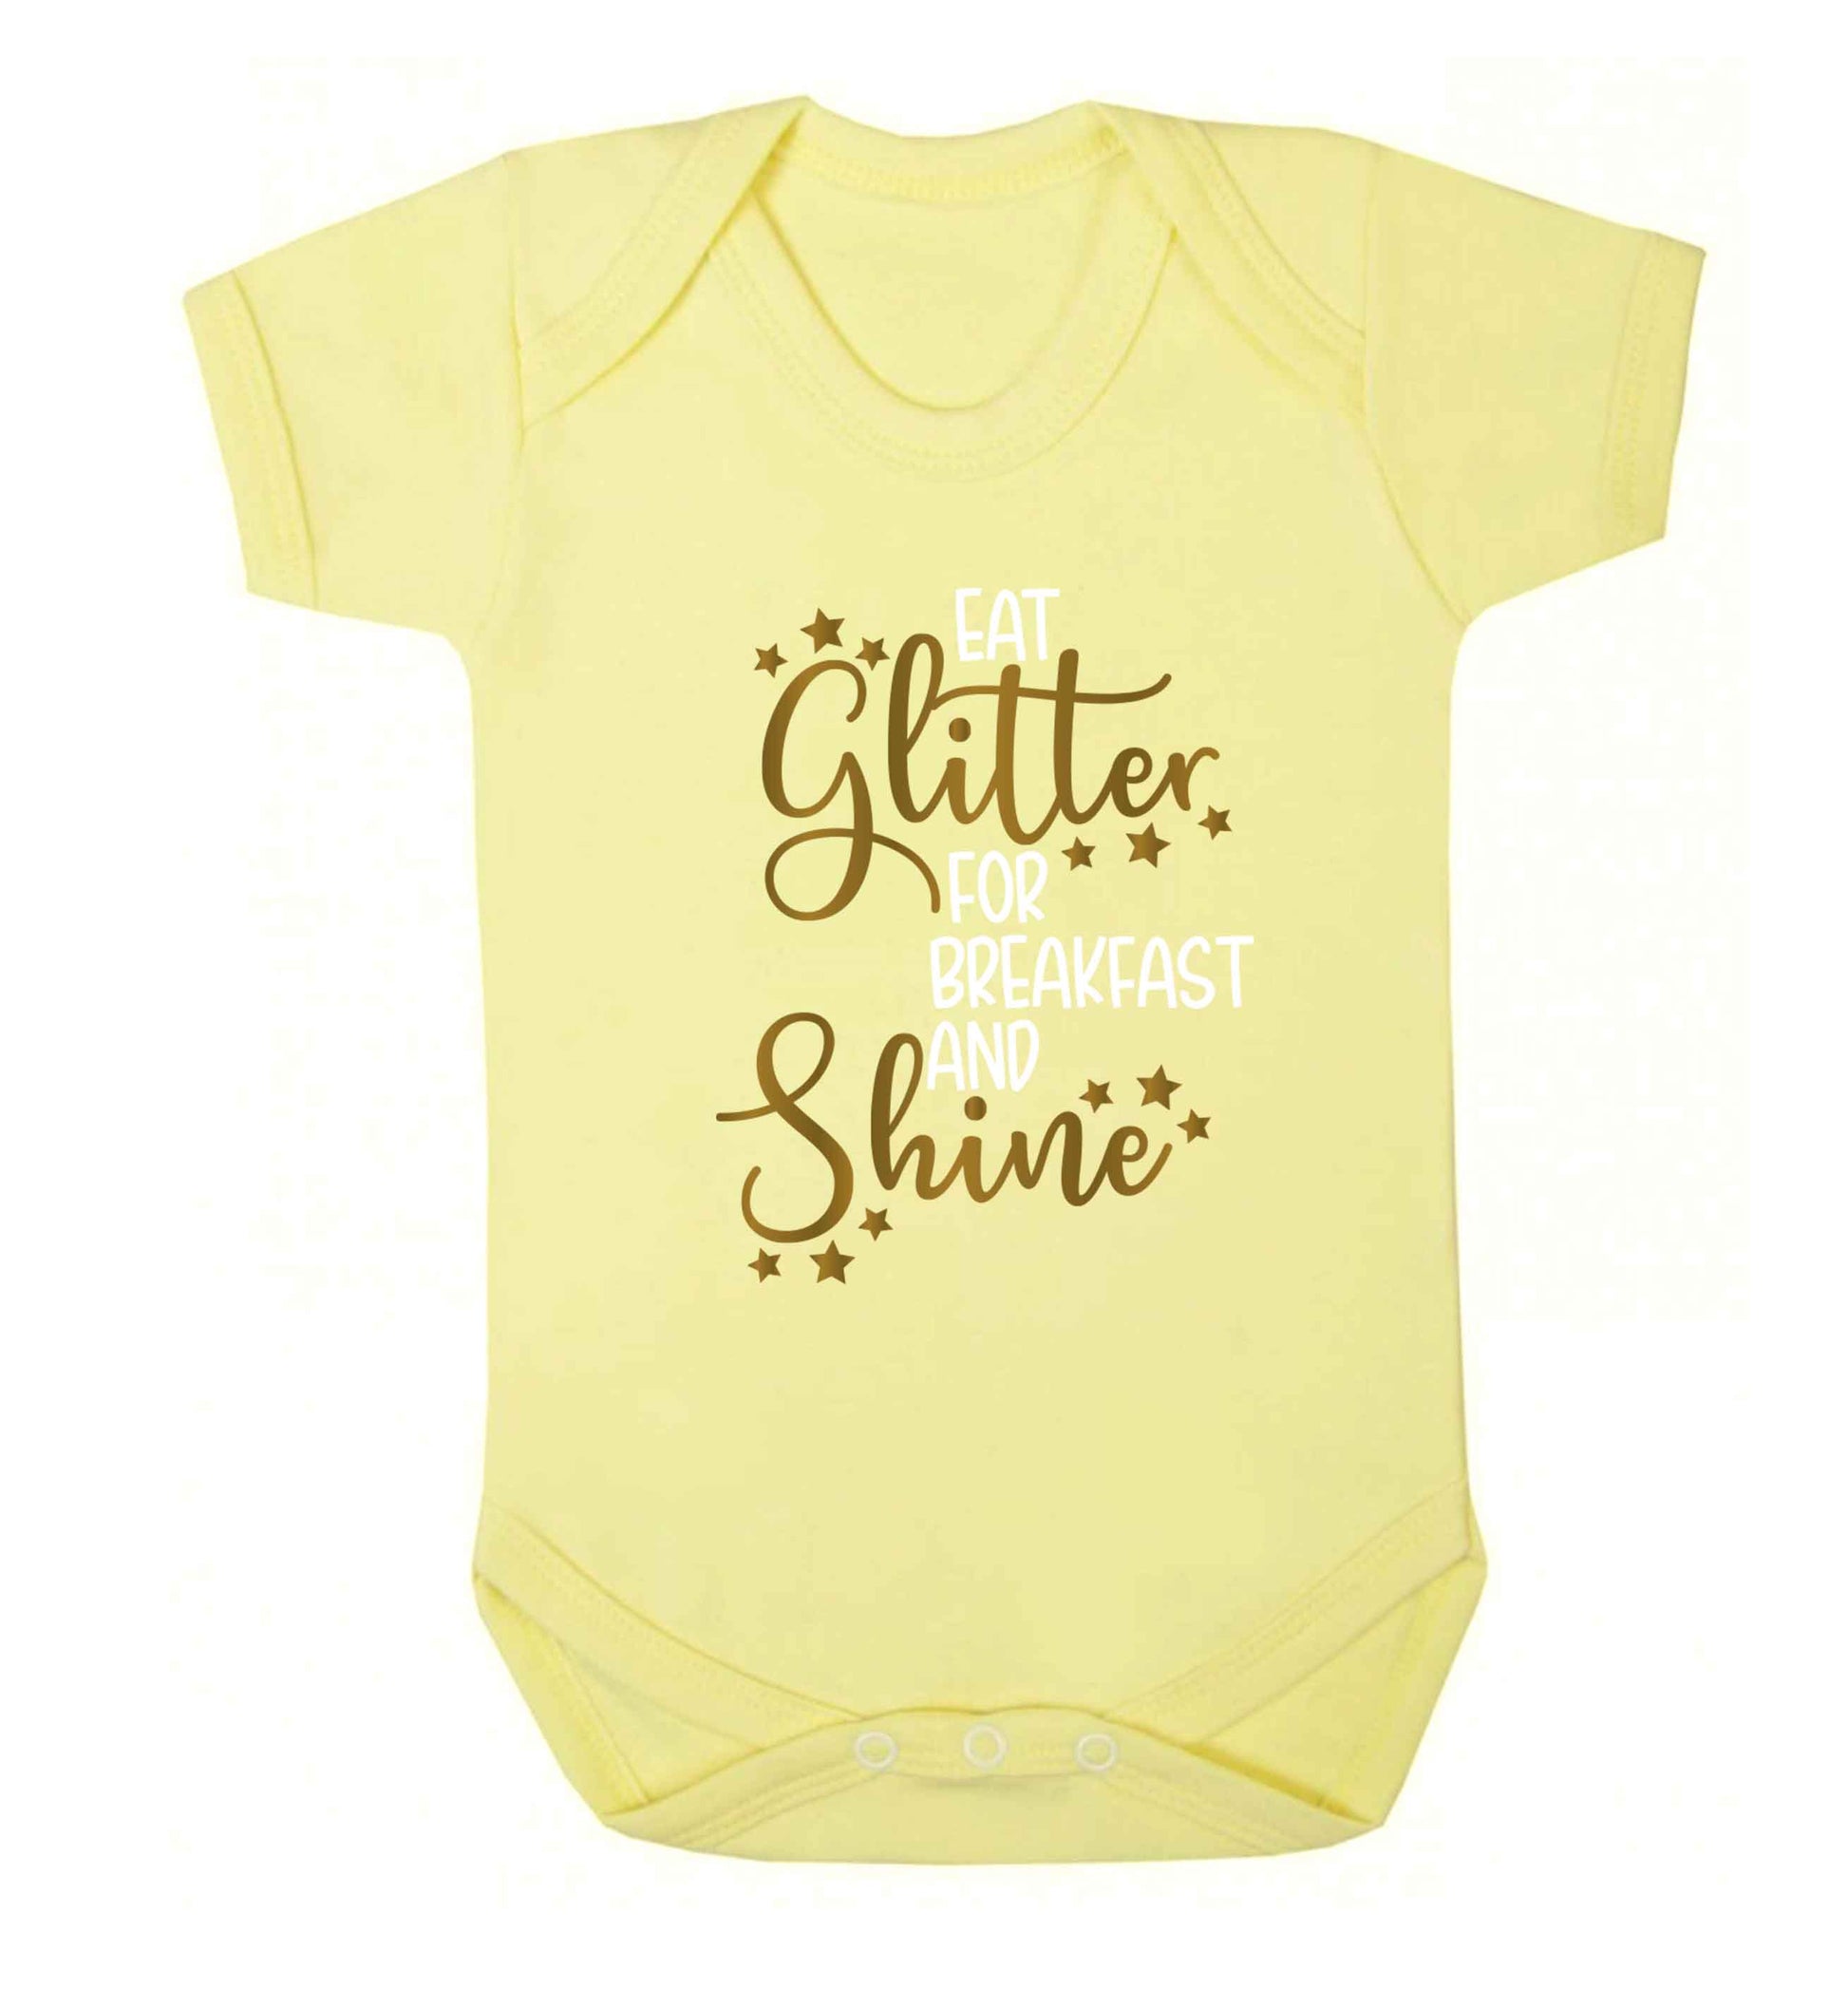 Eat glitter for breakfast and shine all day Baby Vest pale yellow 18-24 months